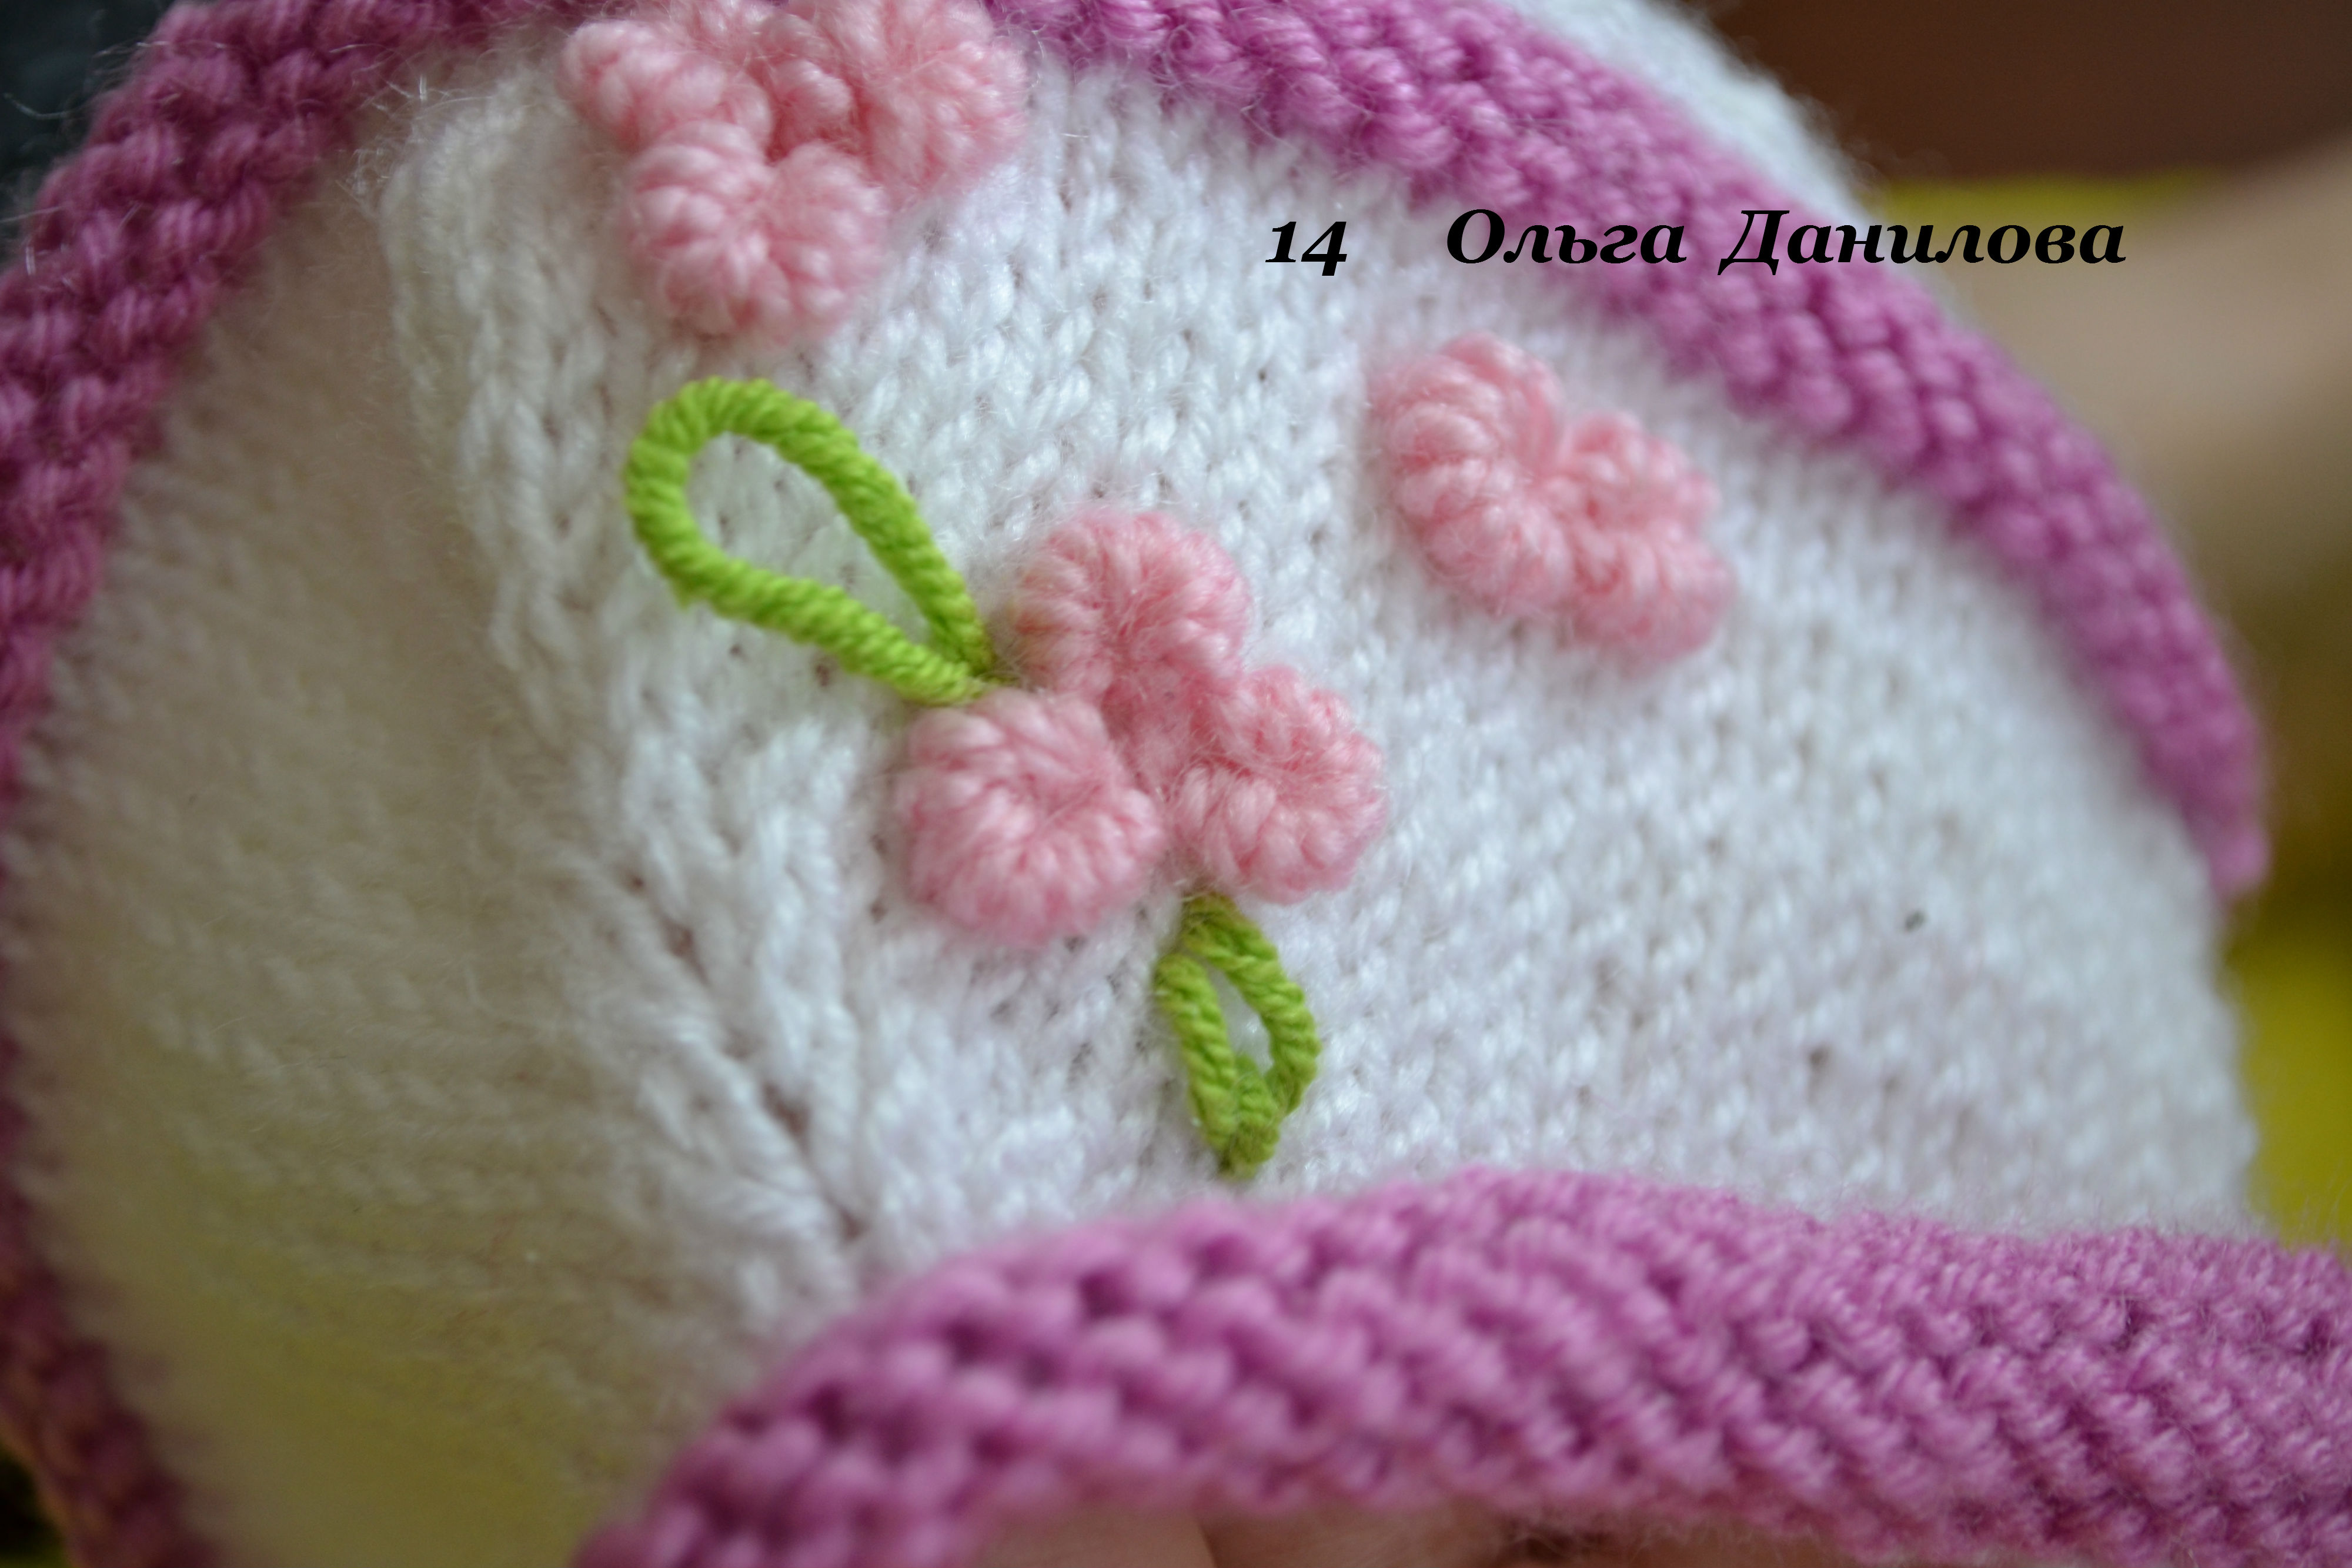 How-to-Make-Pretty-Knitted-Baby-Booties-16.jpg